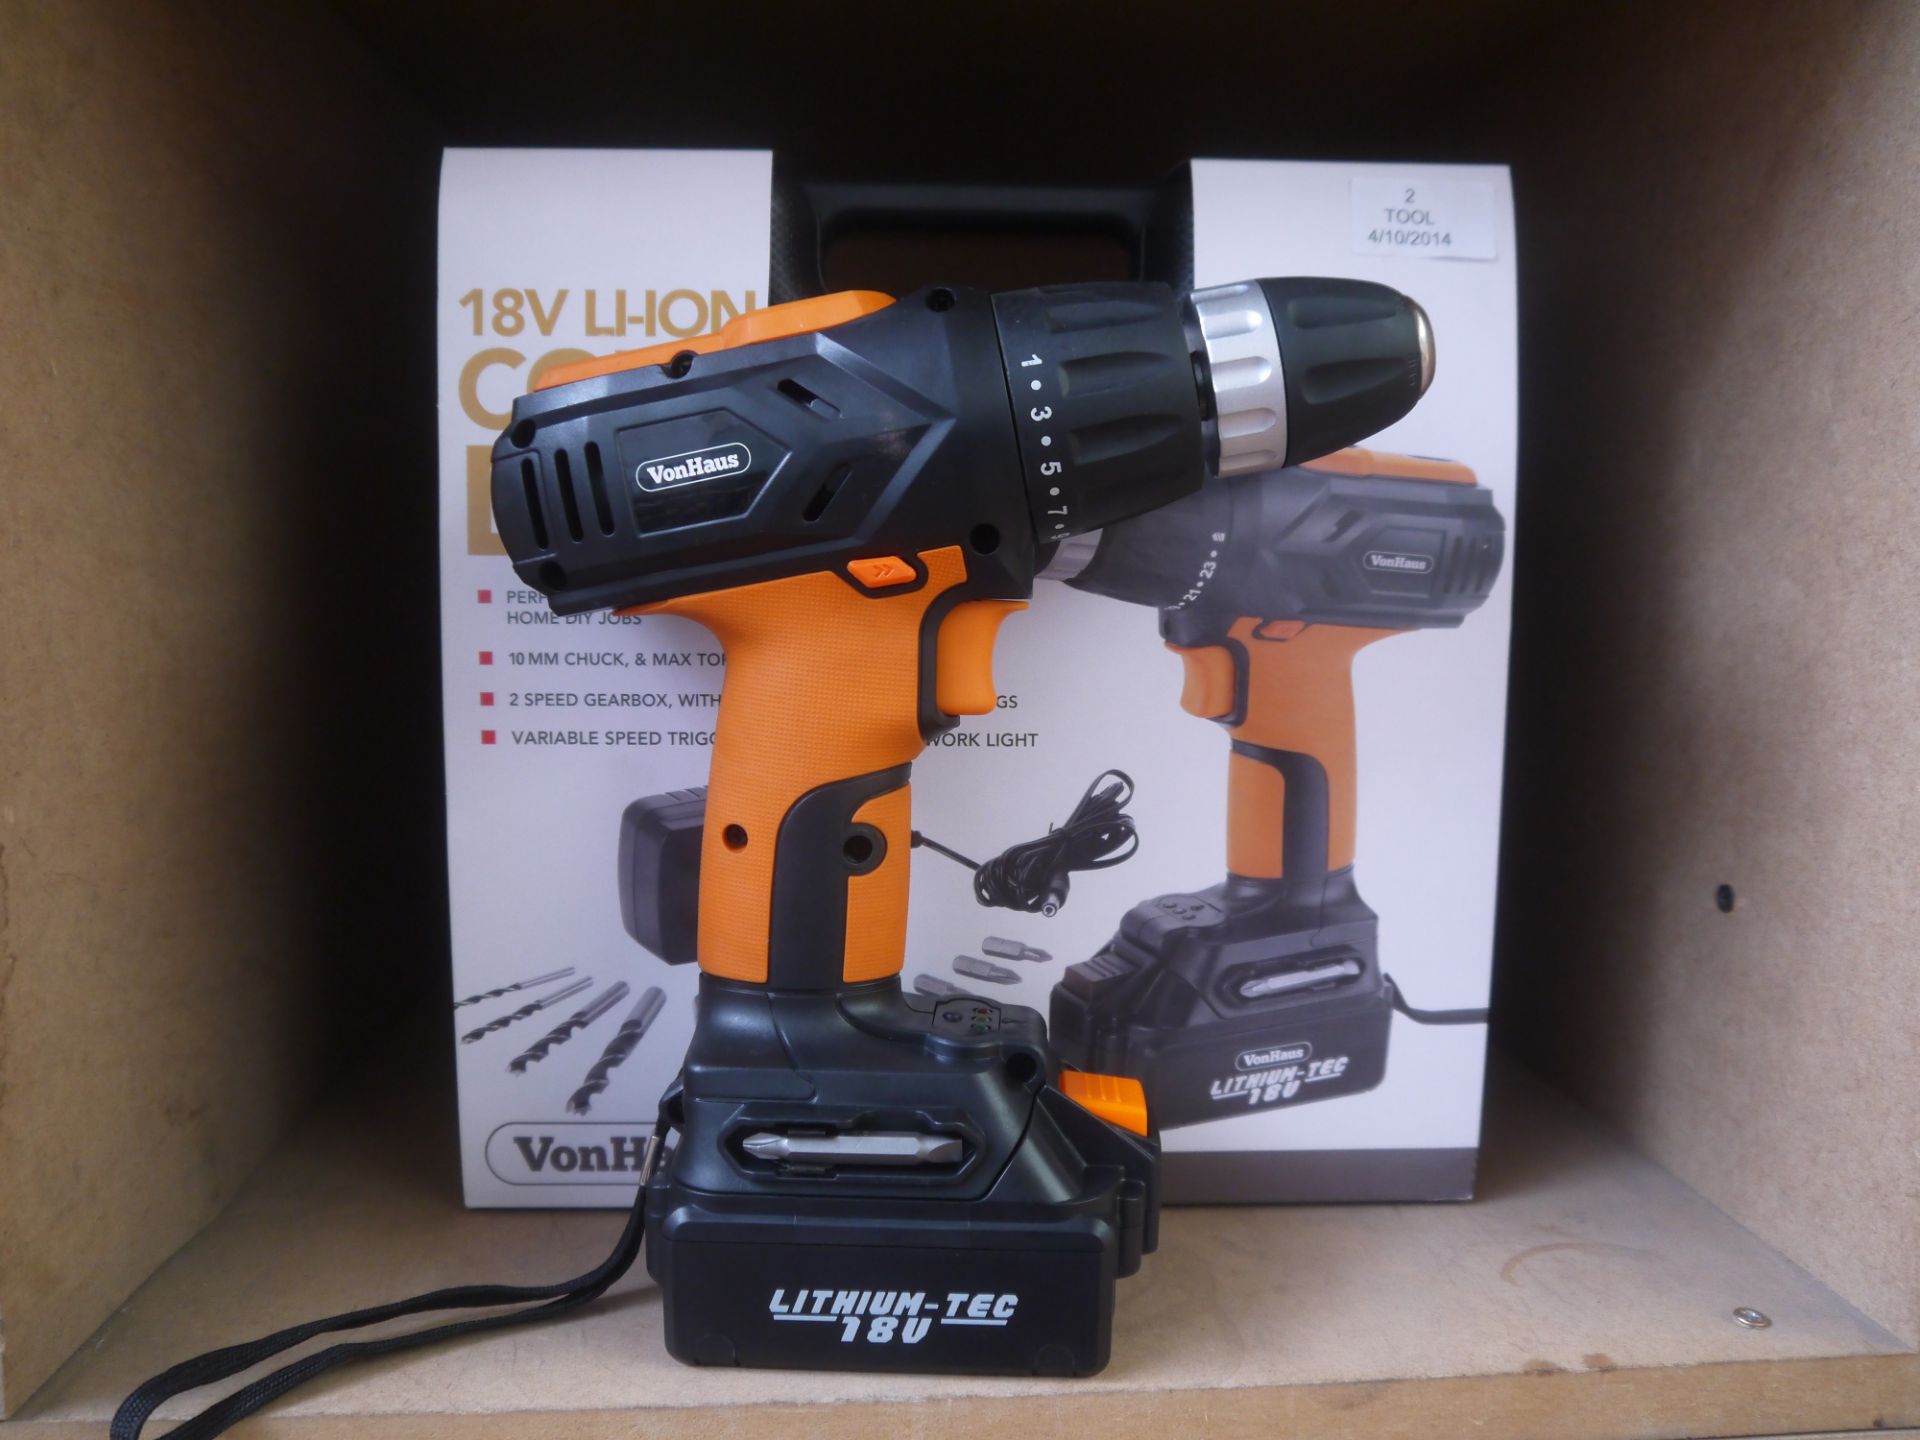 VonHaus 18V Lithium Ion Cordless Drill. Tested working, in carry case.